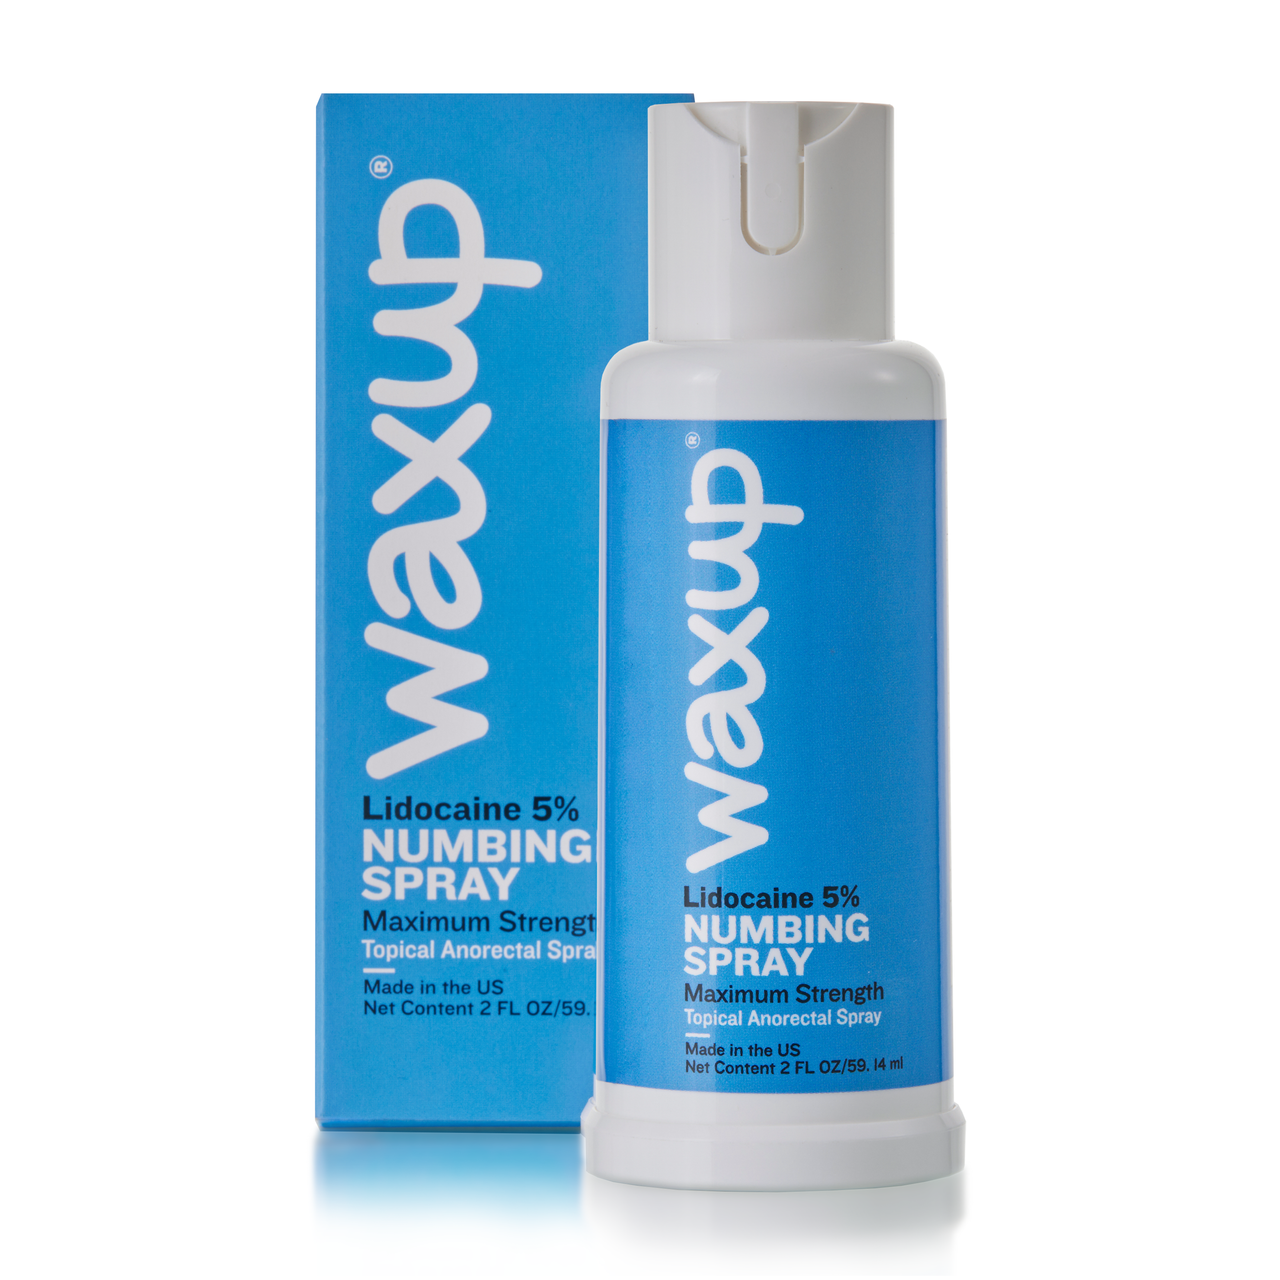 Best Numbing Spray for Waxing - thatswaxup -  - Pre Waxing Skin Care - waxup hair removal wax body waxing kit women and men professional waxing supplies